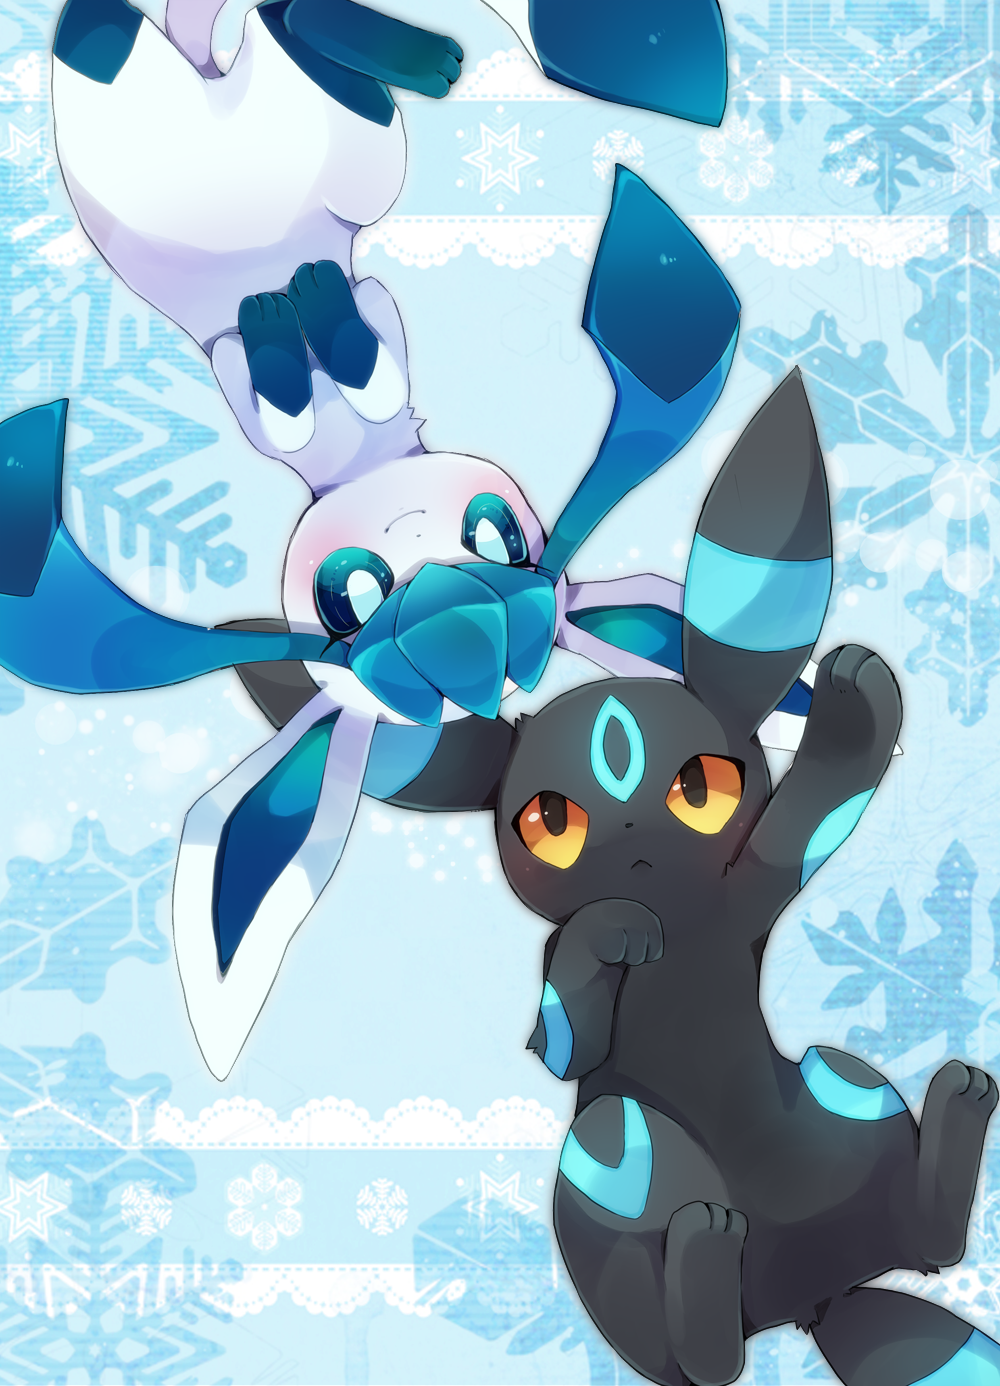 Cute Glaceon Wallpapers